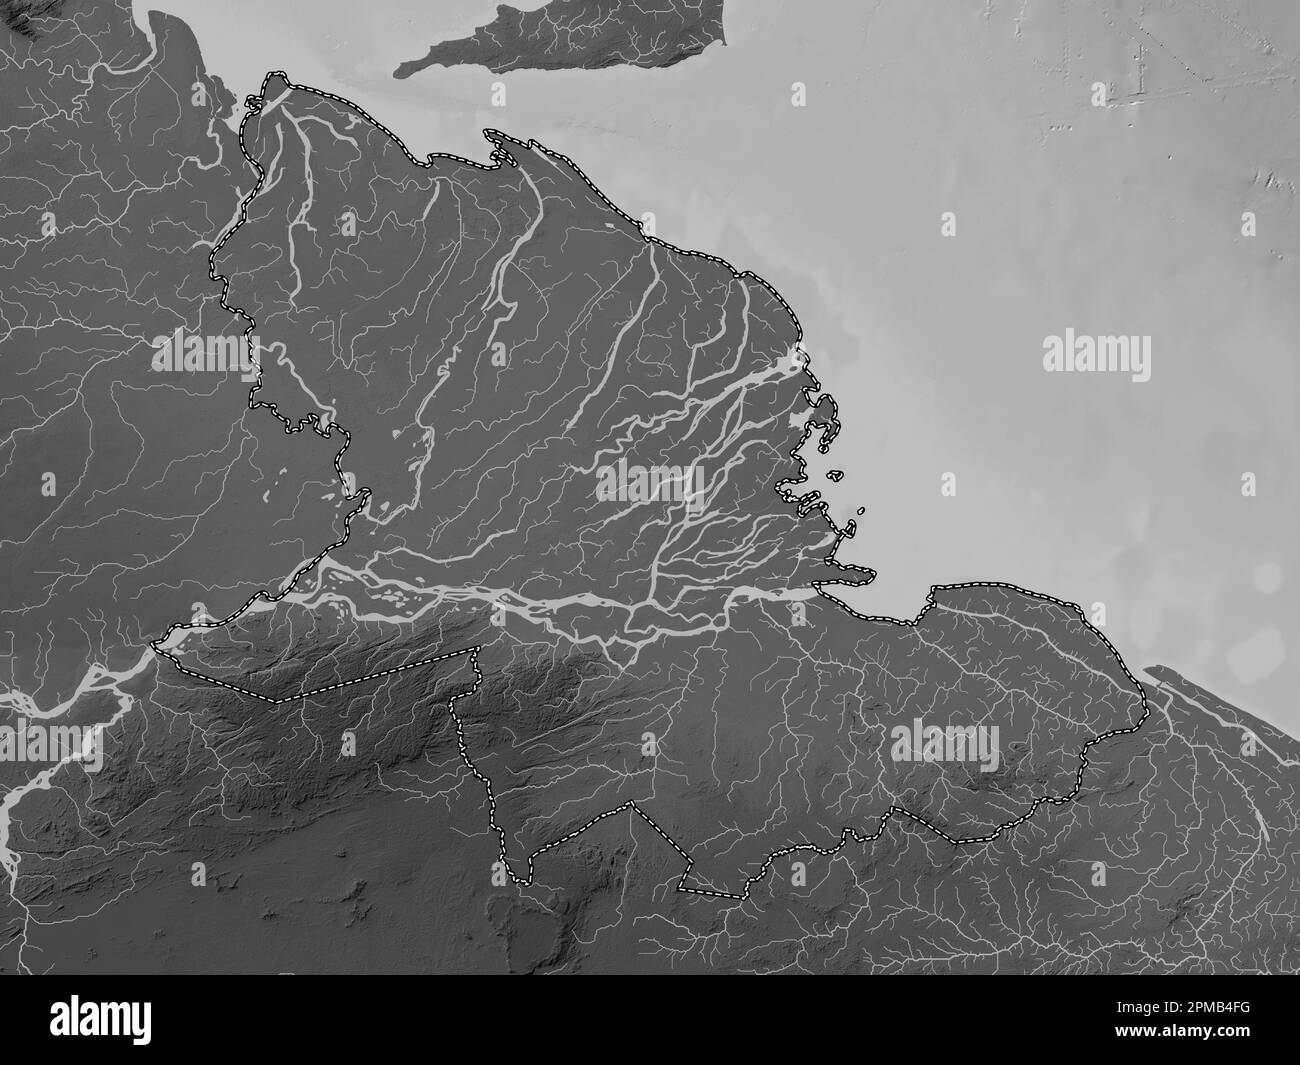 Delta Amacuro, state of Venezuela. Grayscale elevation map with lakes and rivers Stock Photo